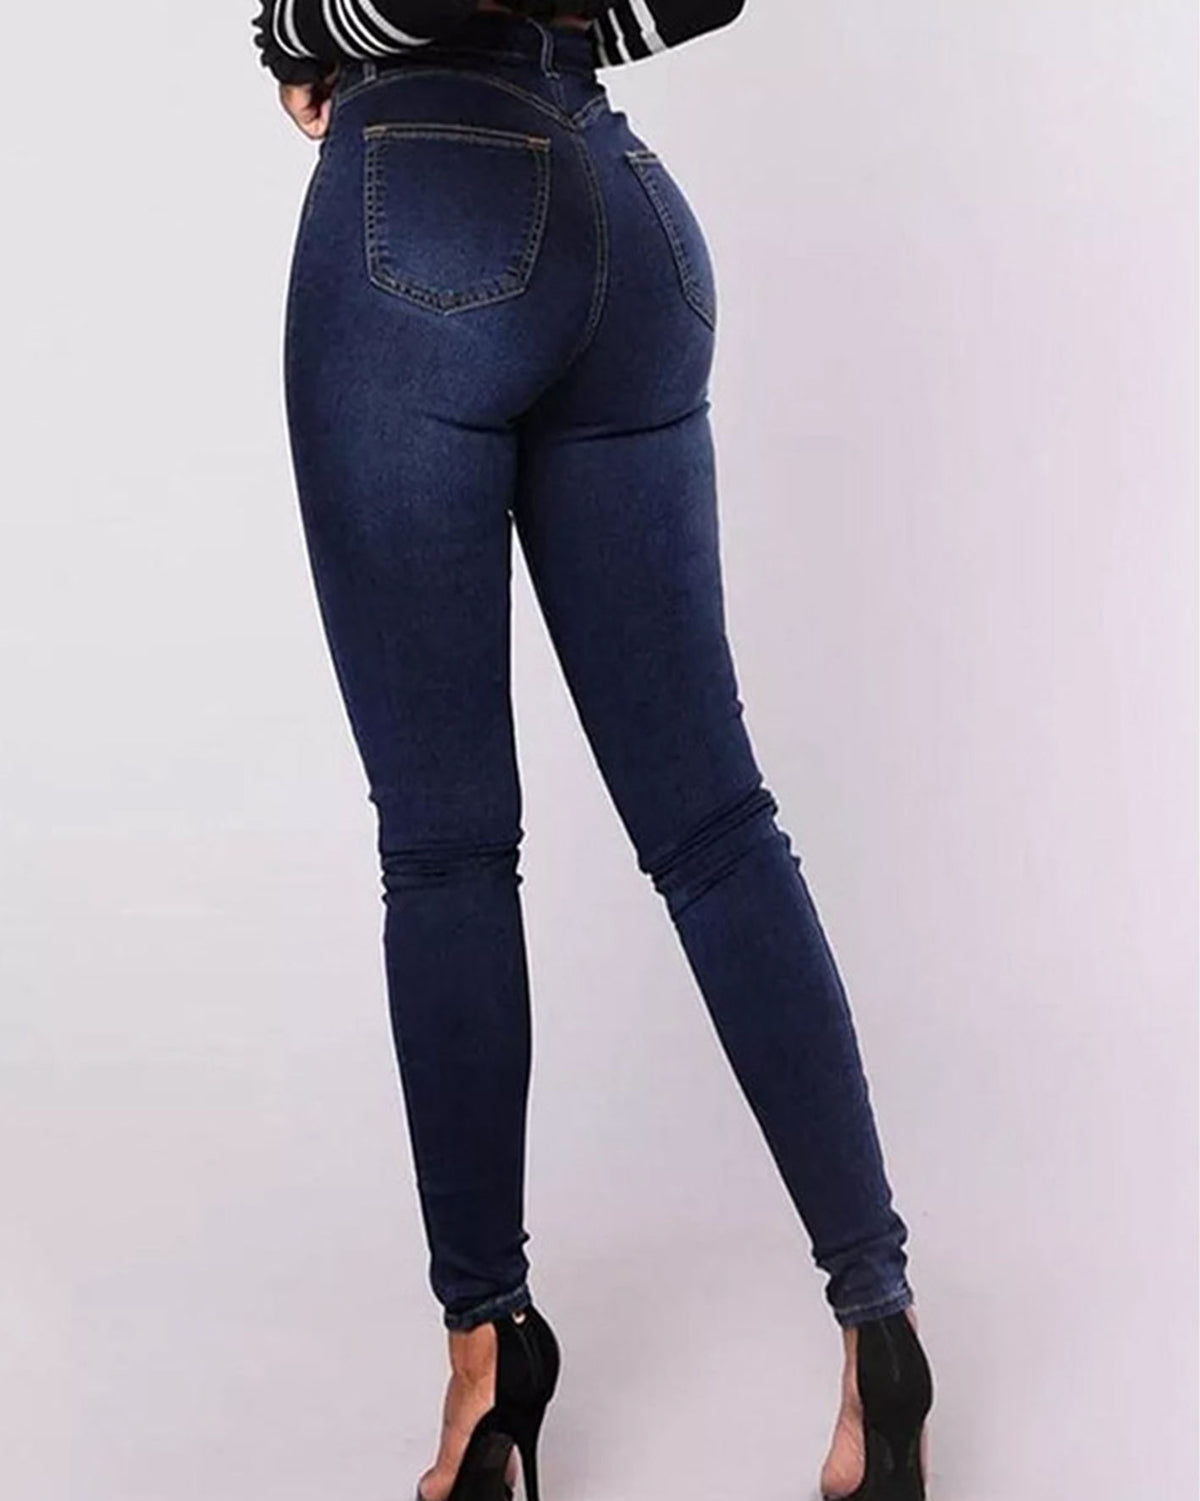 High-Waisted Casual Two-Row Stretch Jeans With Multiple Buttons